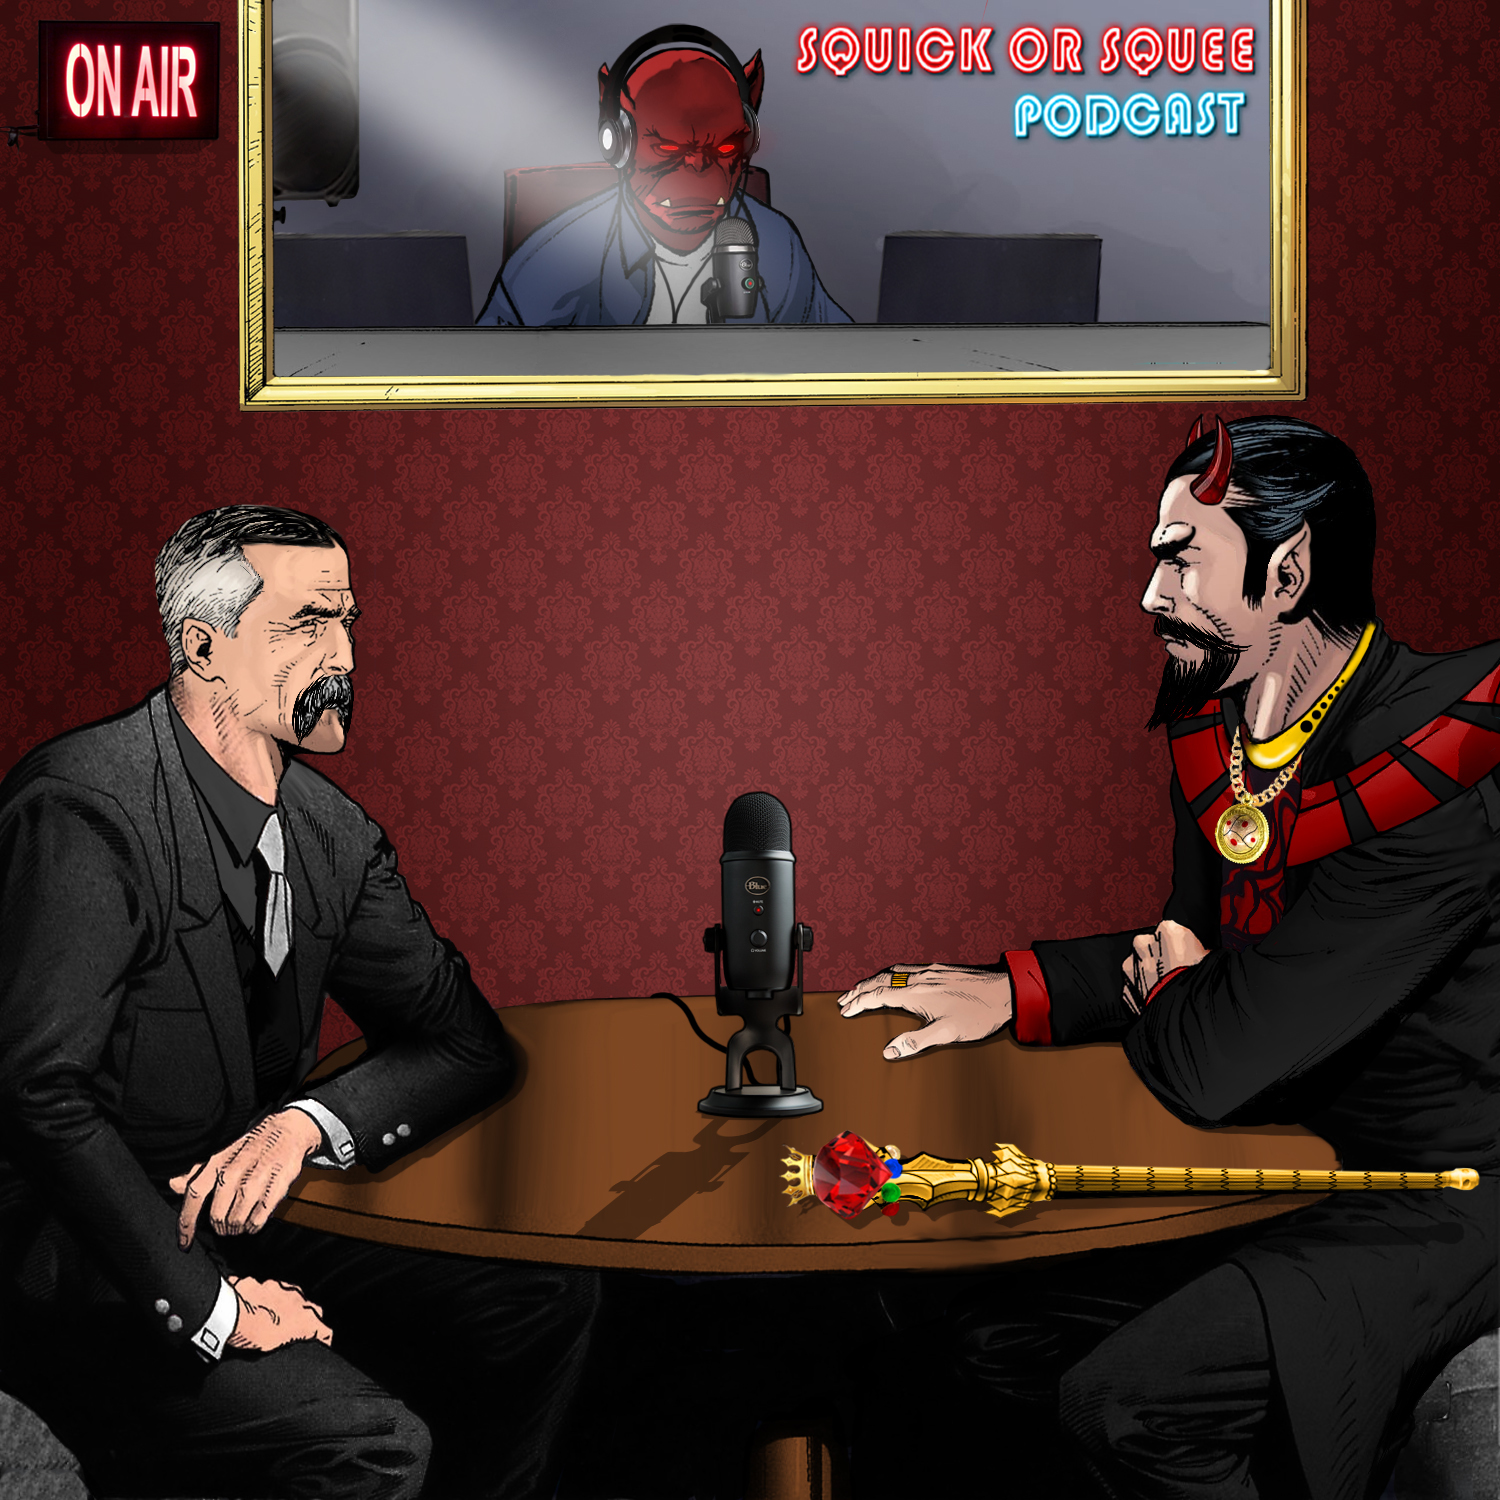 The internet avatar of Iago Faustus conducts a podcast interview with Asmodeus, demon prince of lust in this illustration for the Squick or Squee podcast.  